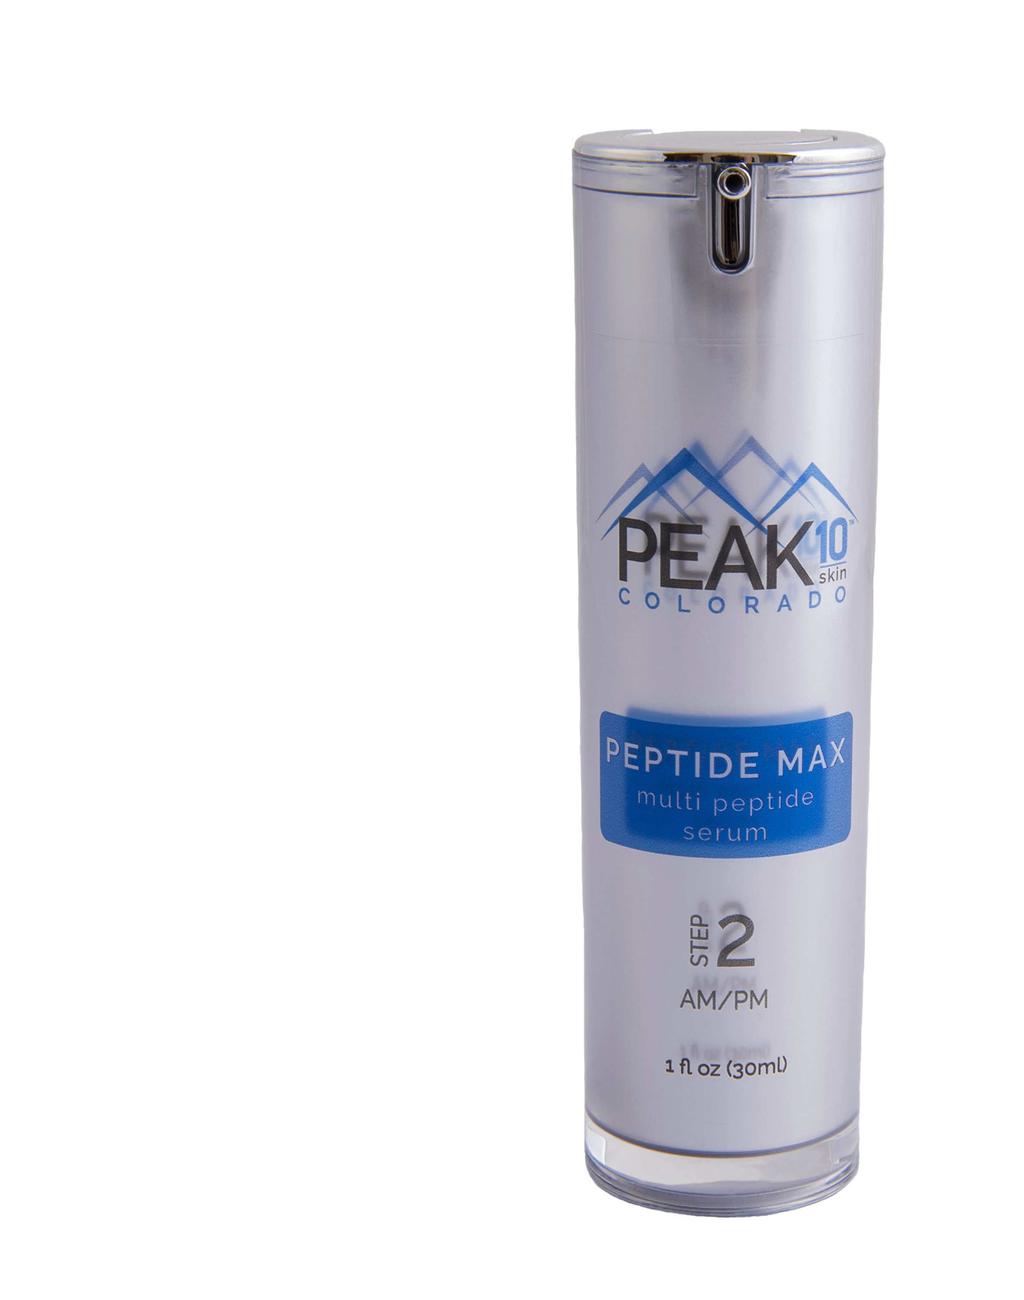 PEPTIDE MAX multi peptide serum This product contains six of the most potent peptides currently available for age defense.